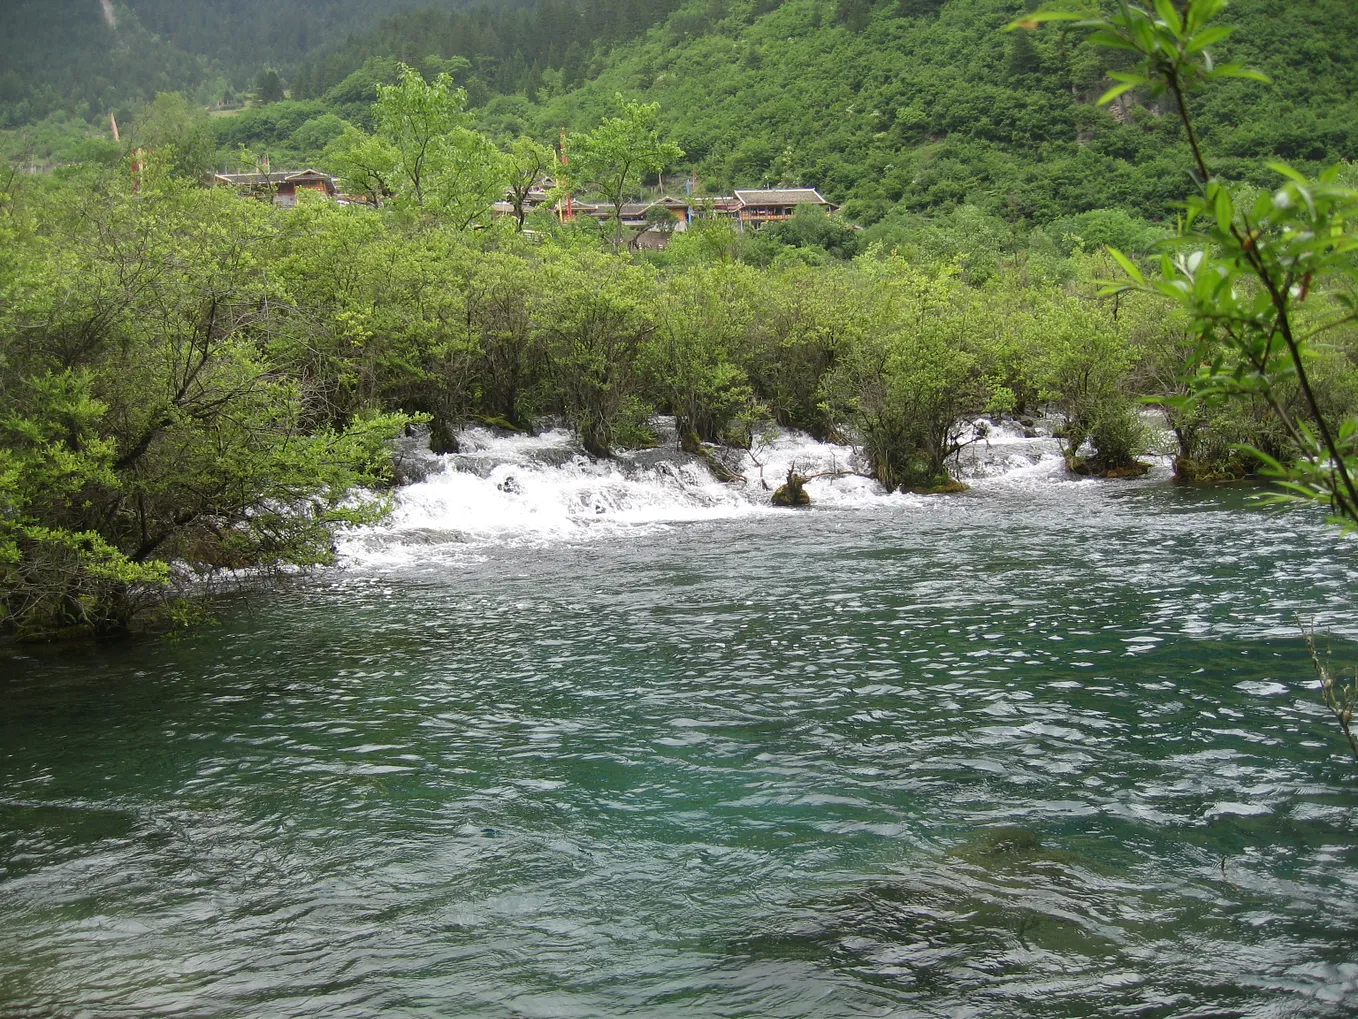 White water rapids in the center flow into a turquoise lake surrounded by thick green trees. Behind the trees in the distance, the top parts of colorful Tibetan buildings and flags peak through.